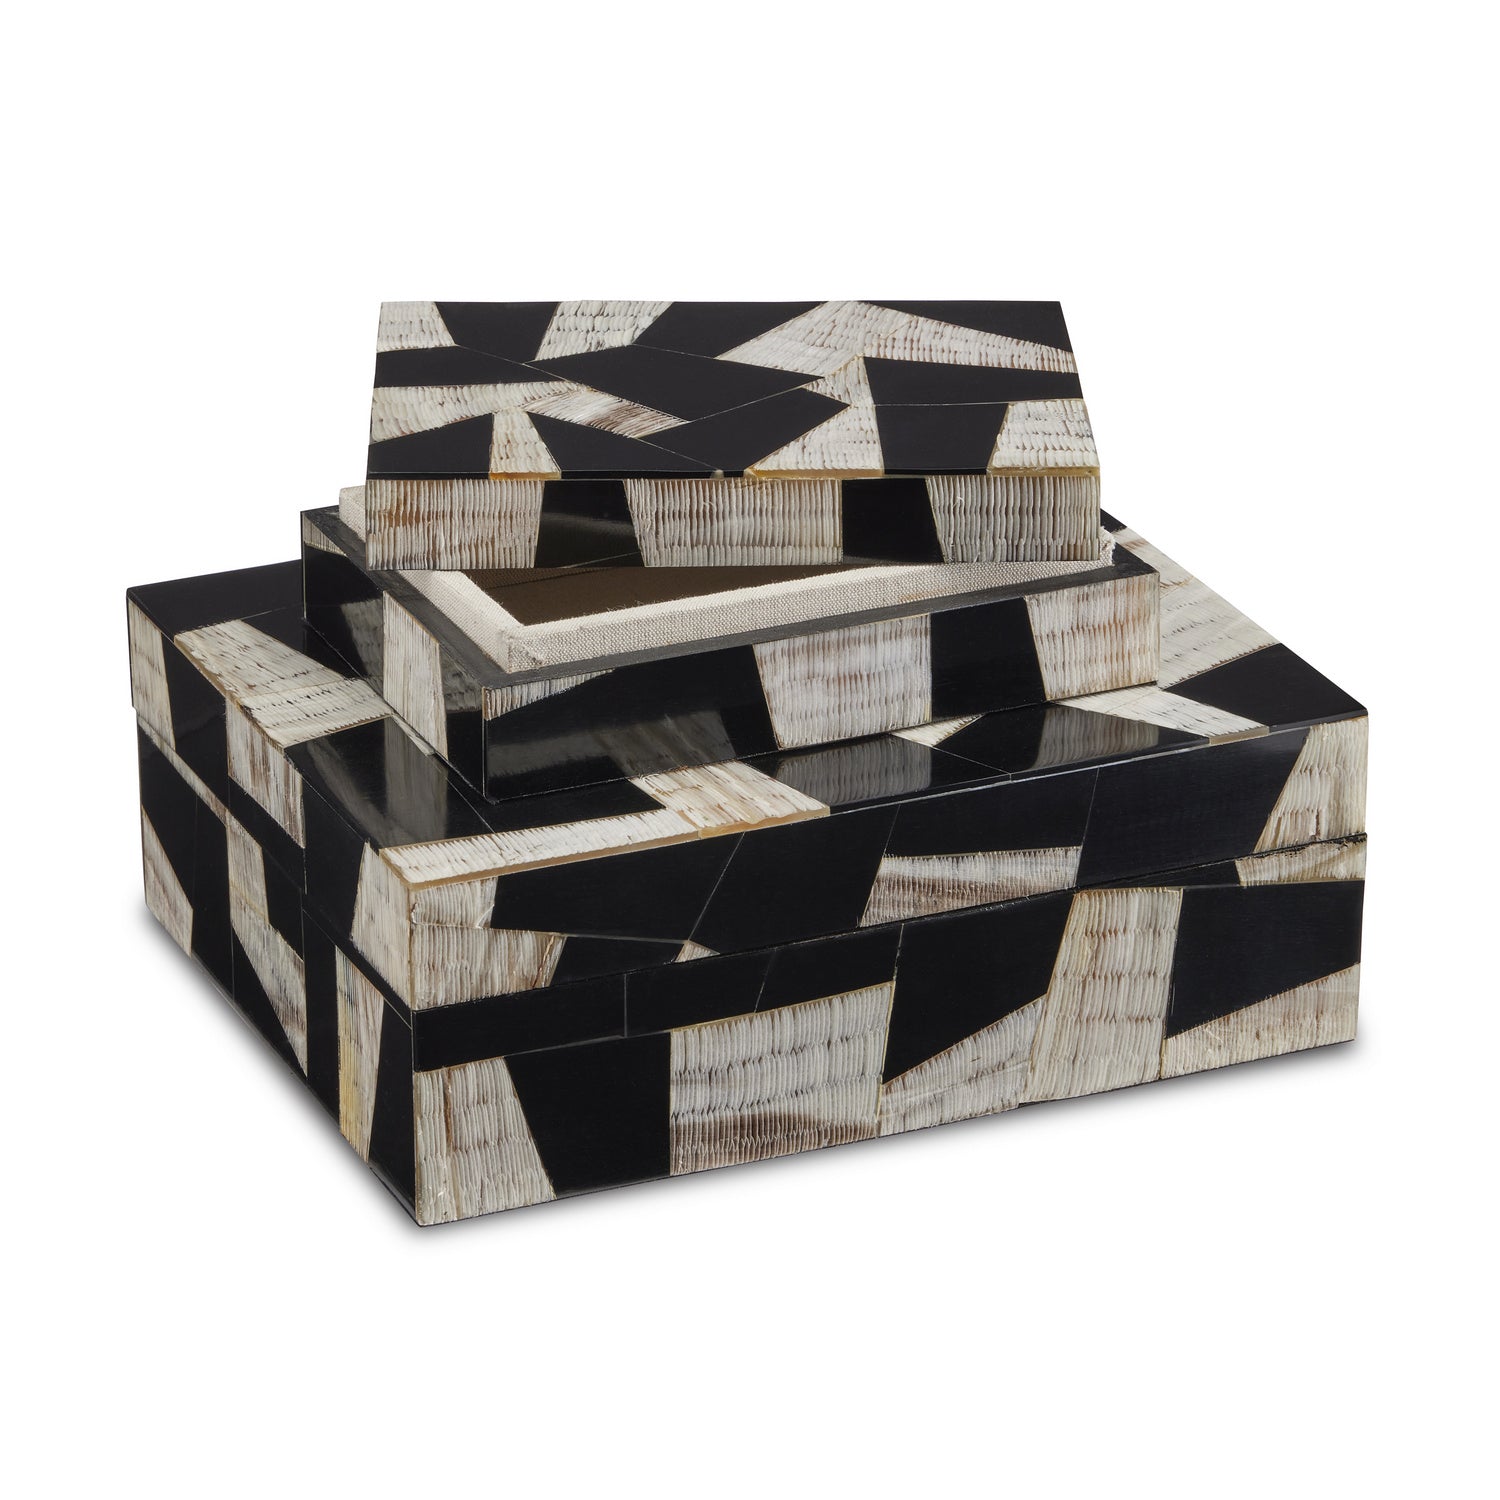 Box Set of 2 from the Bindu collection in Natural/Black/Linen finish